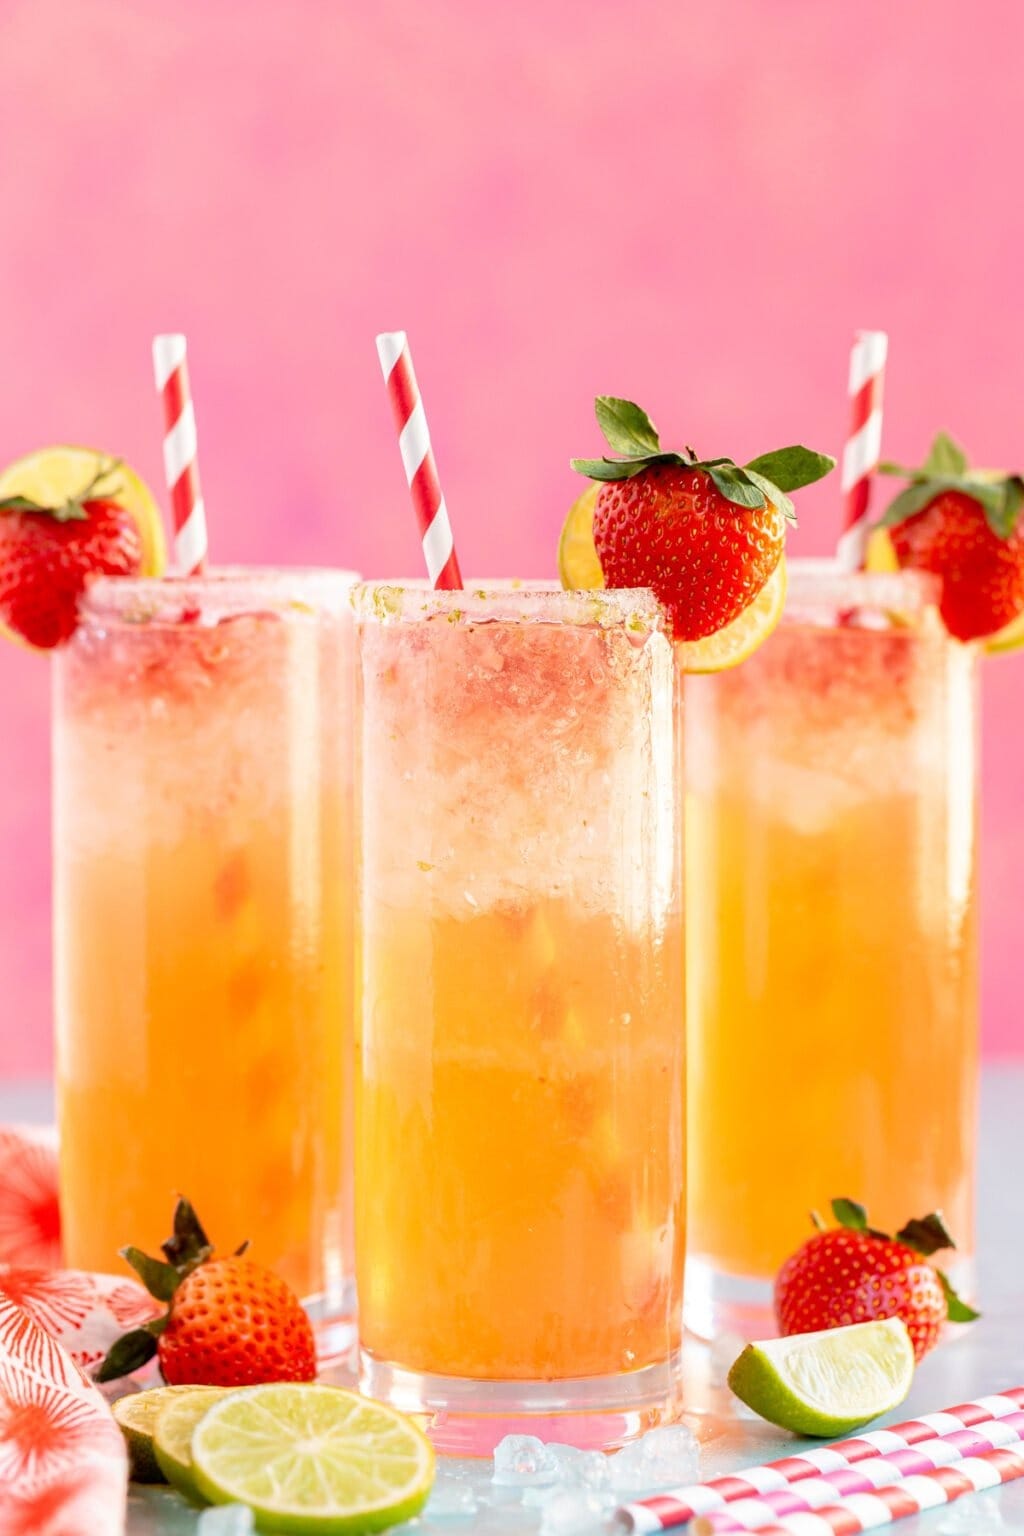 Three glasses of strawberry lemonade with fresh strawberries and a slice of lime on the rim.